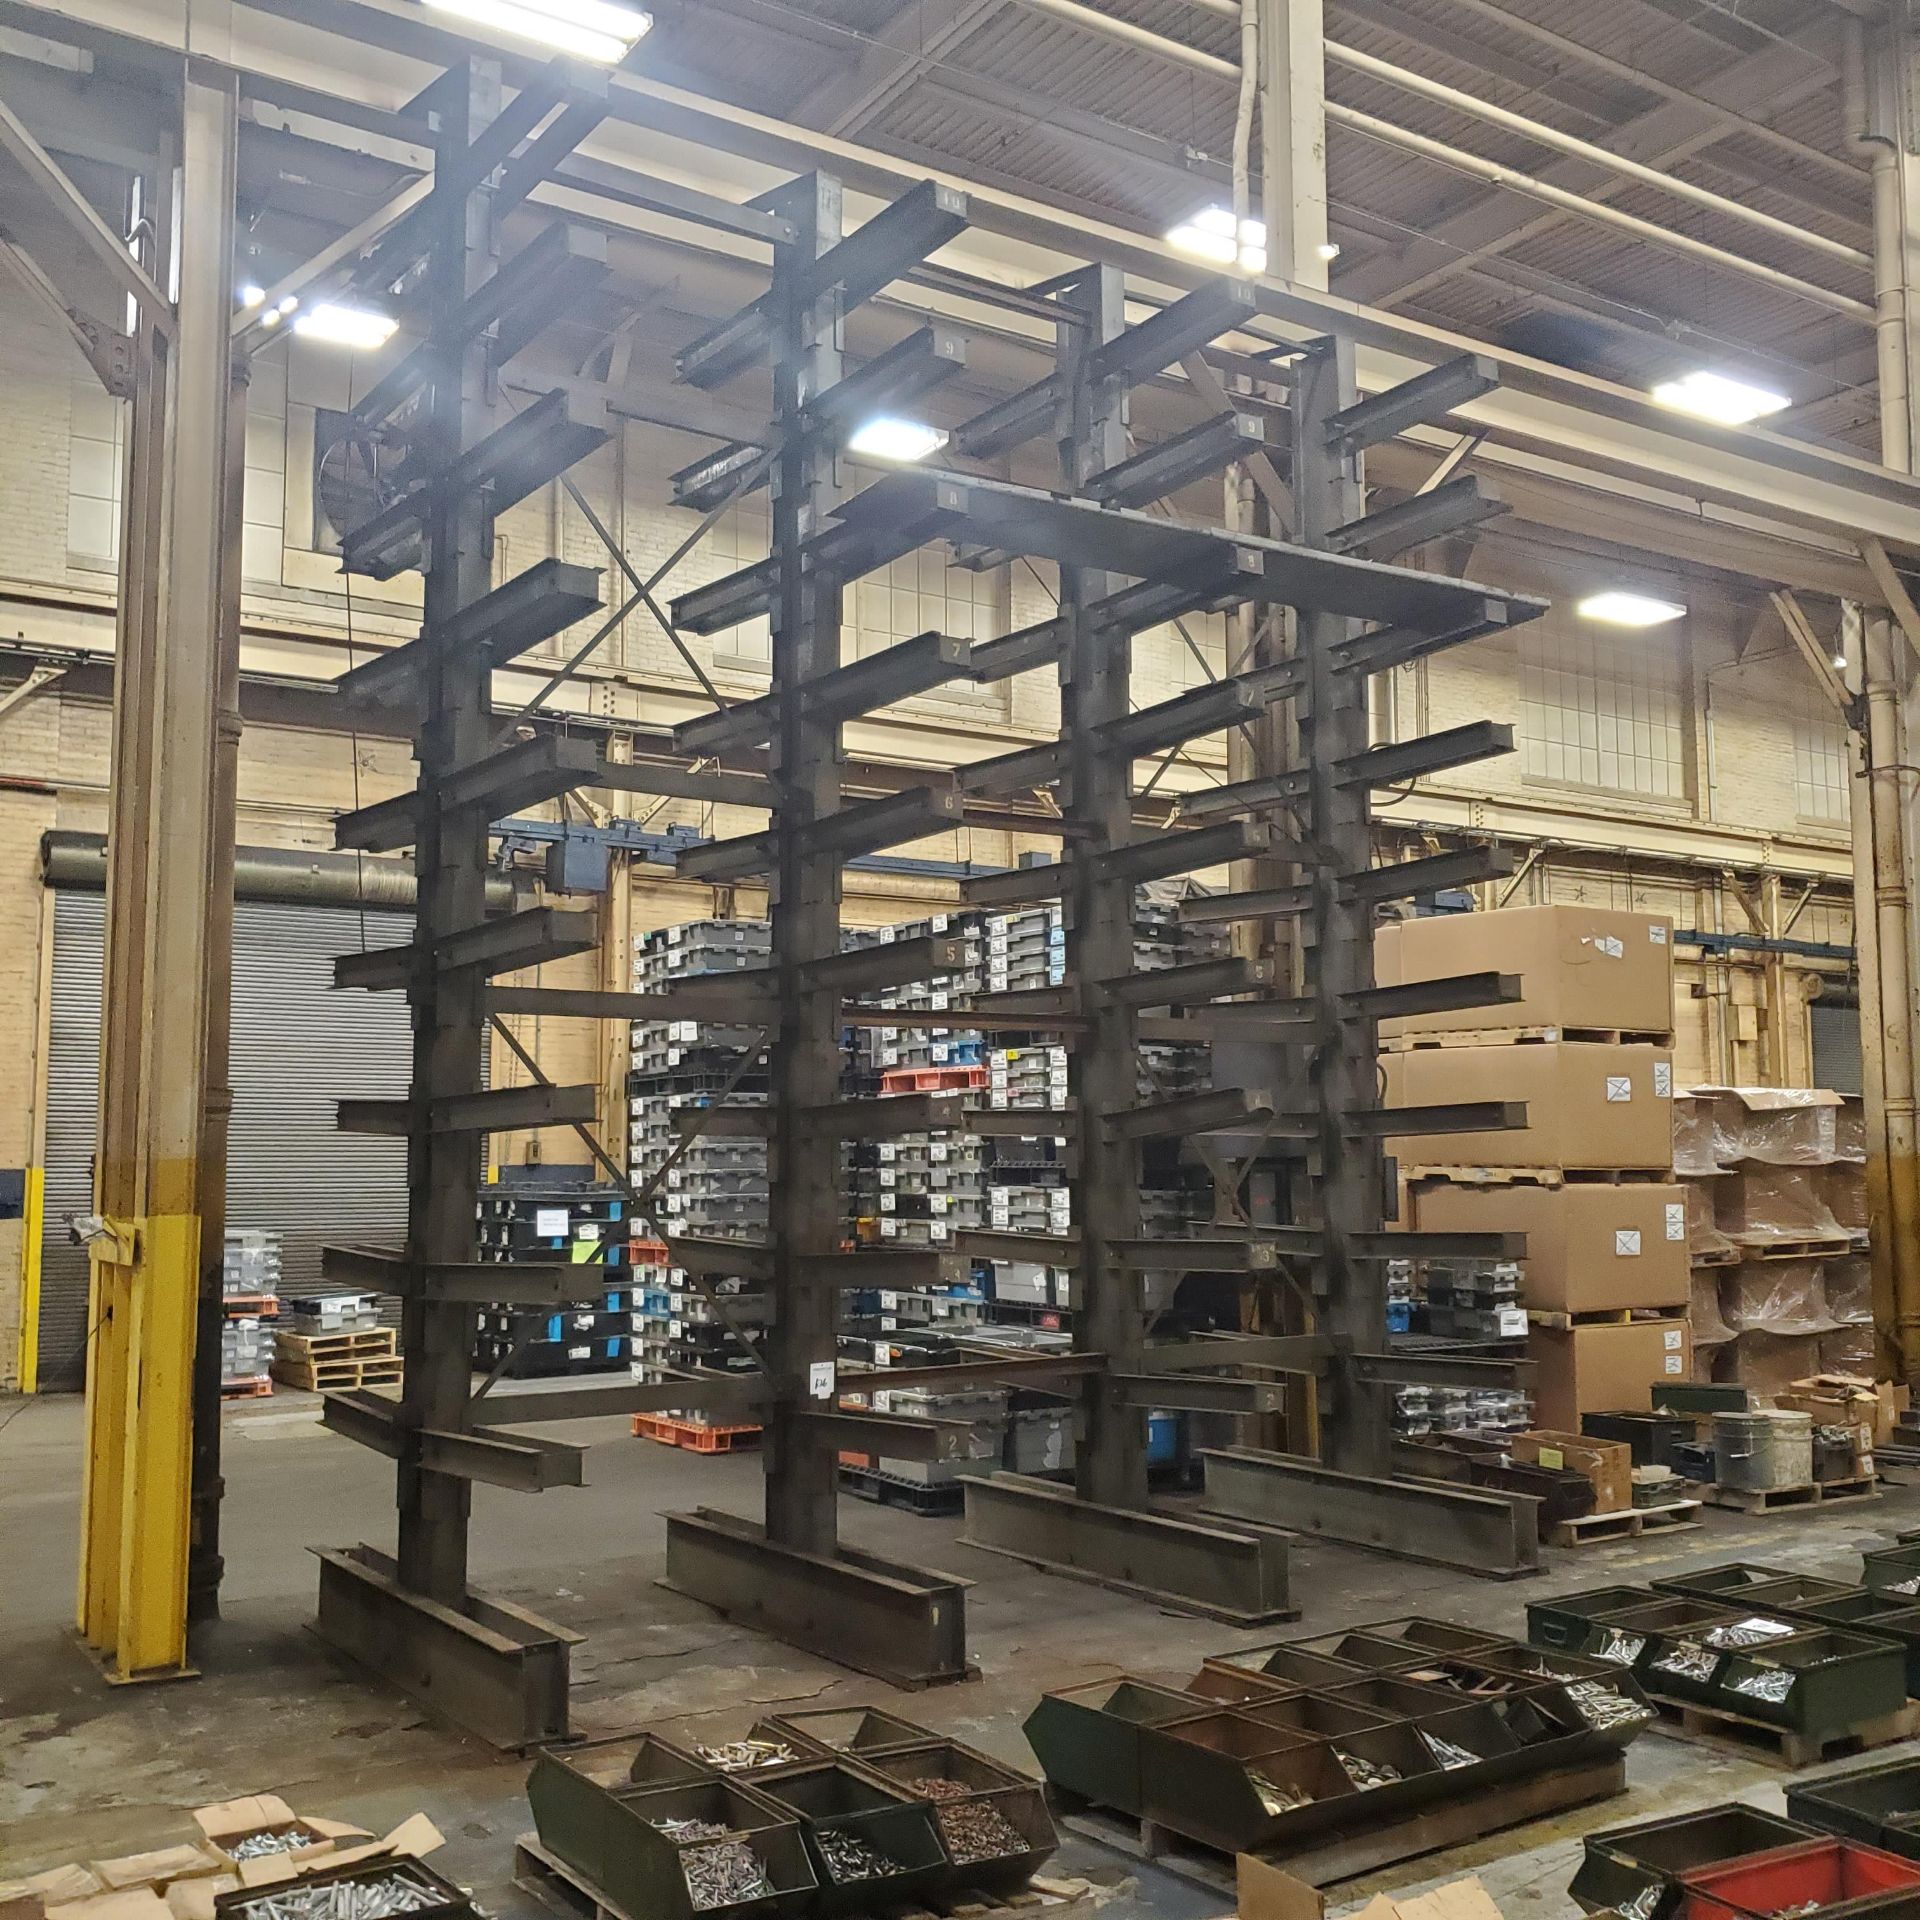 Double Sided 4 Column Material Rack 14' High x 16' Wide w/64 34" Adjustable Arms, 82" Deep,